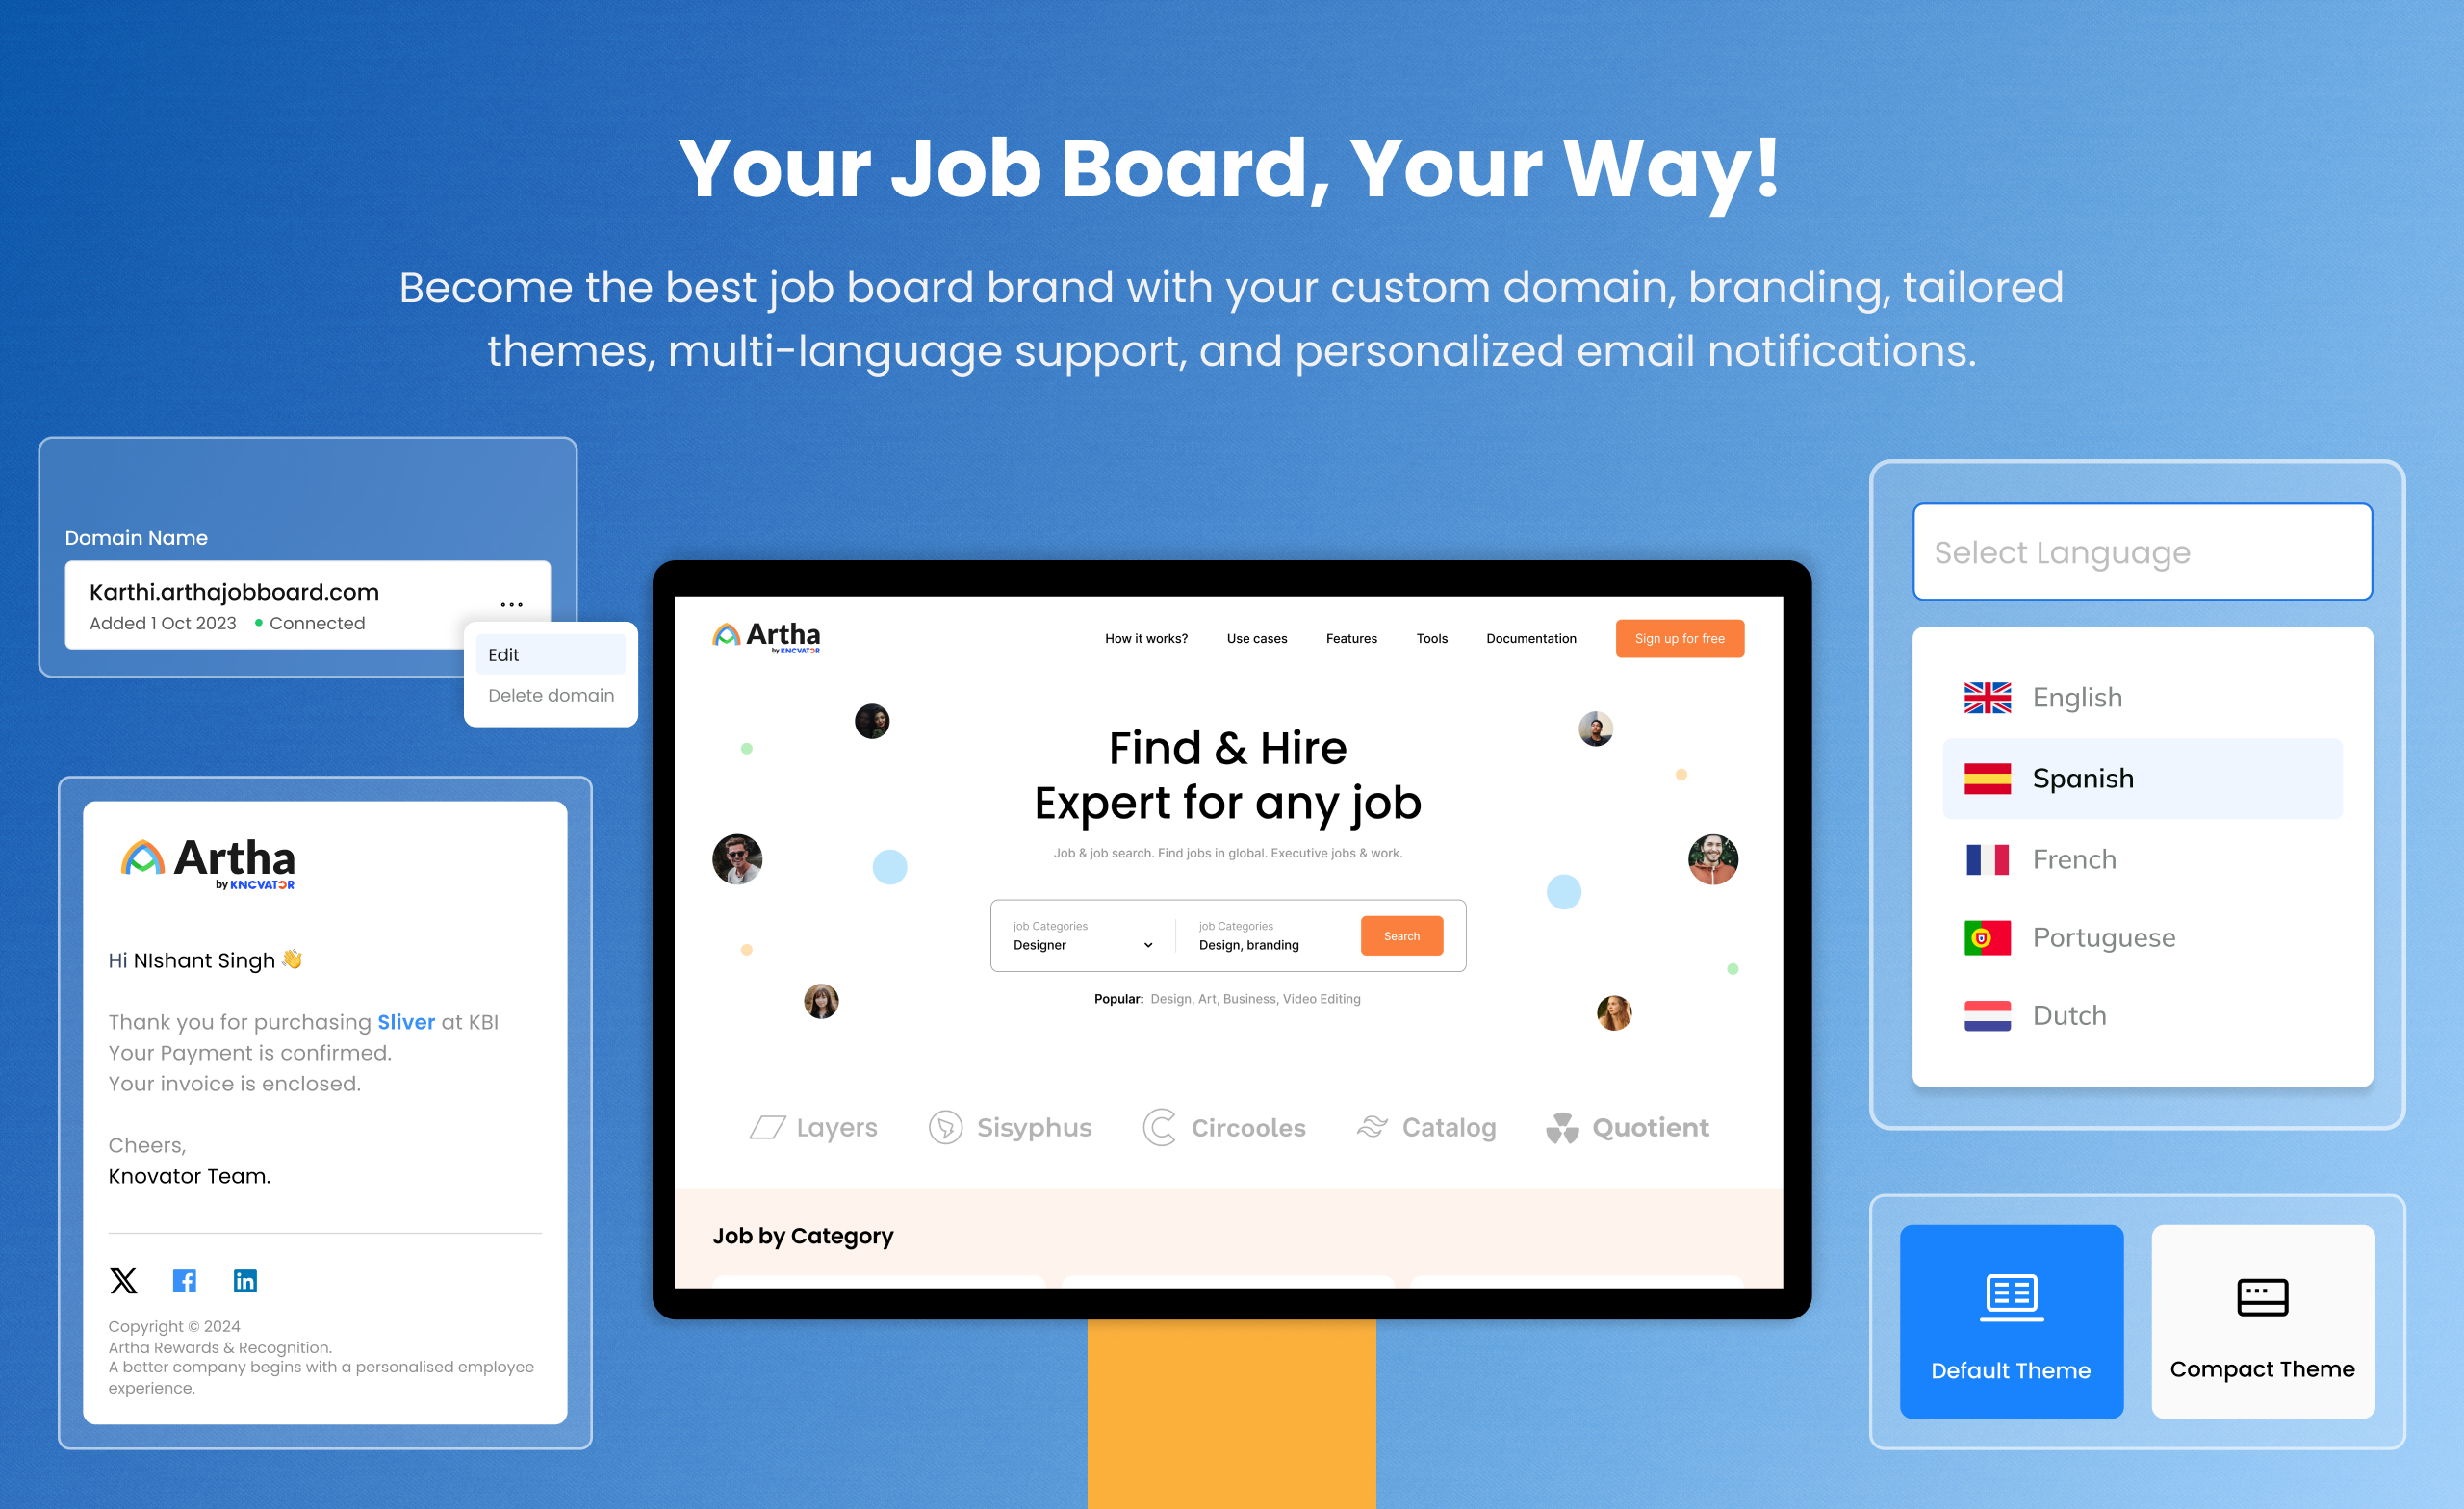 Your Job Board, Your Way!
Become the best job board brand with your custom domain, branding, tailored themes, multi-language support, and personalized email notifications.